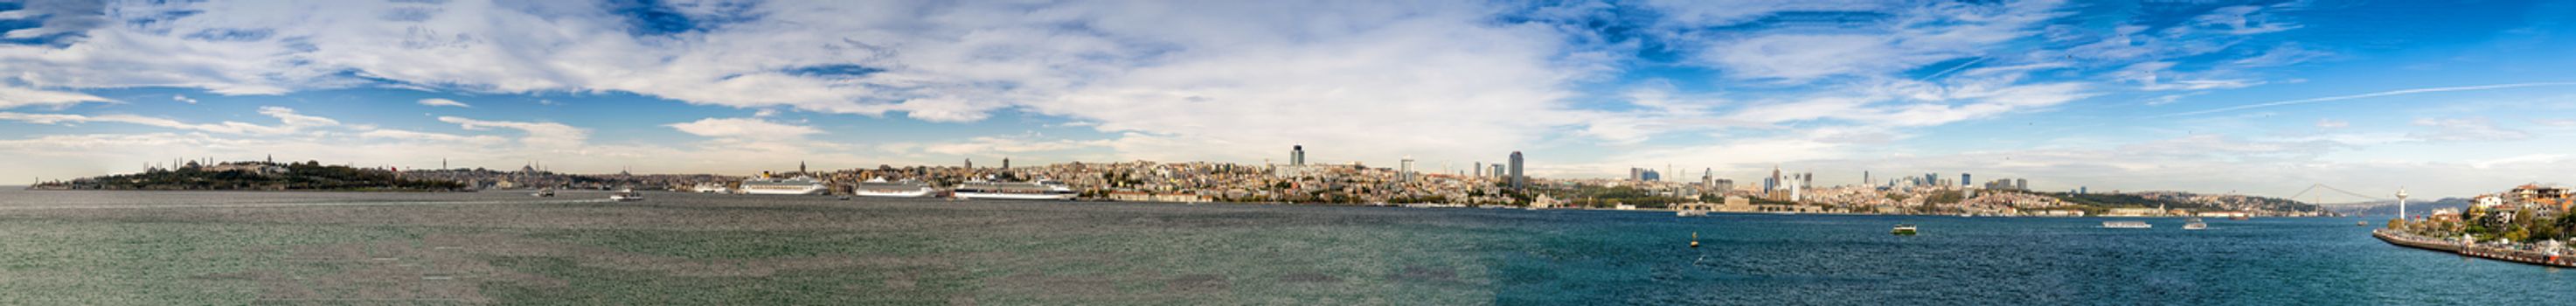 Complete panoramic view of Istanbul from Maiden's Tower.